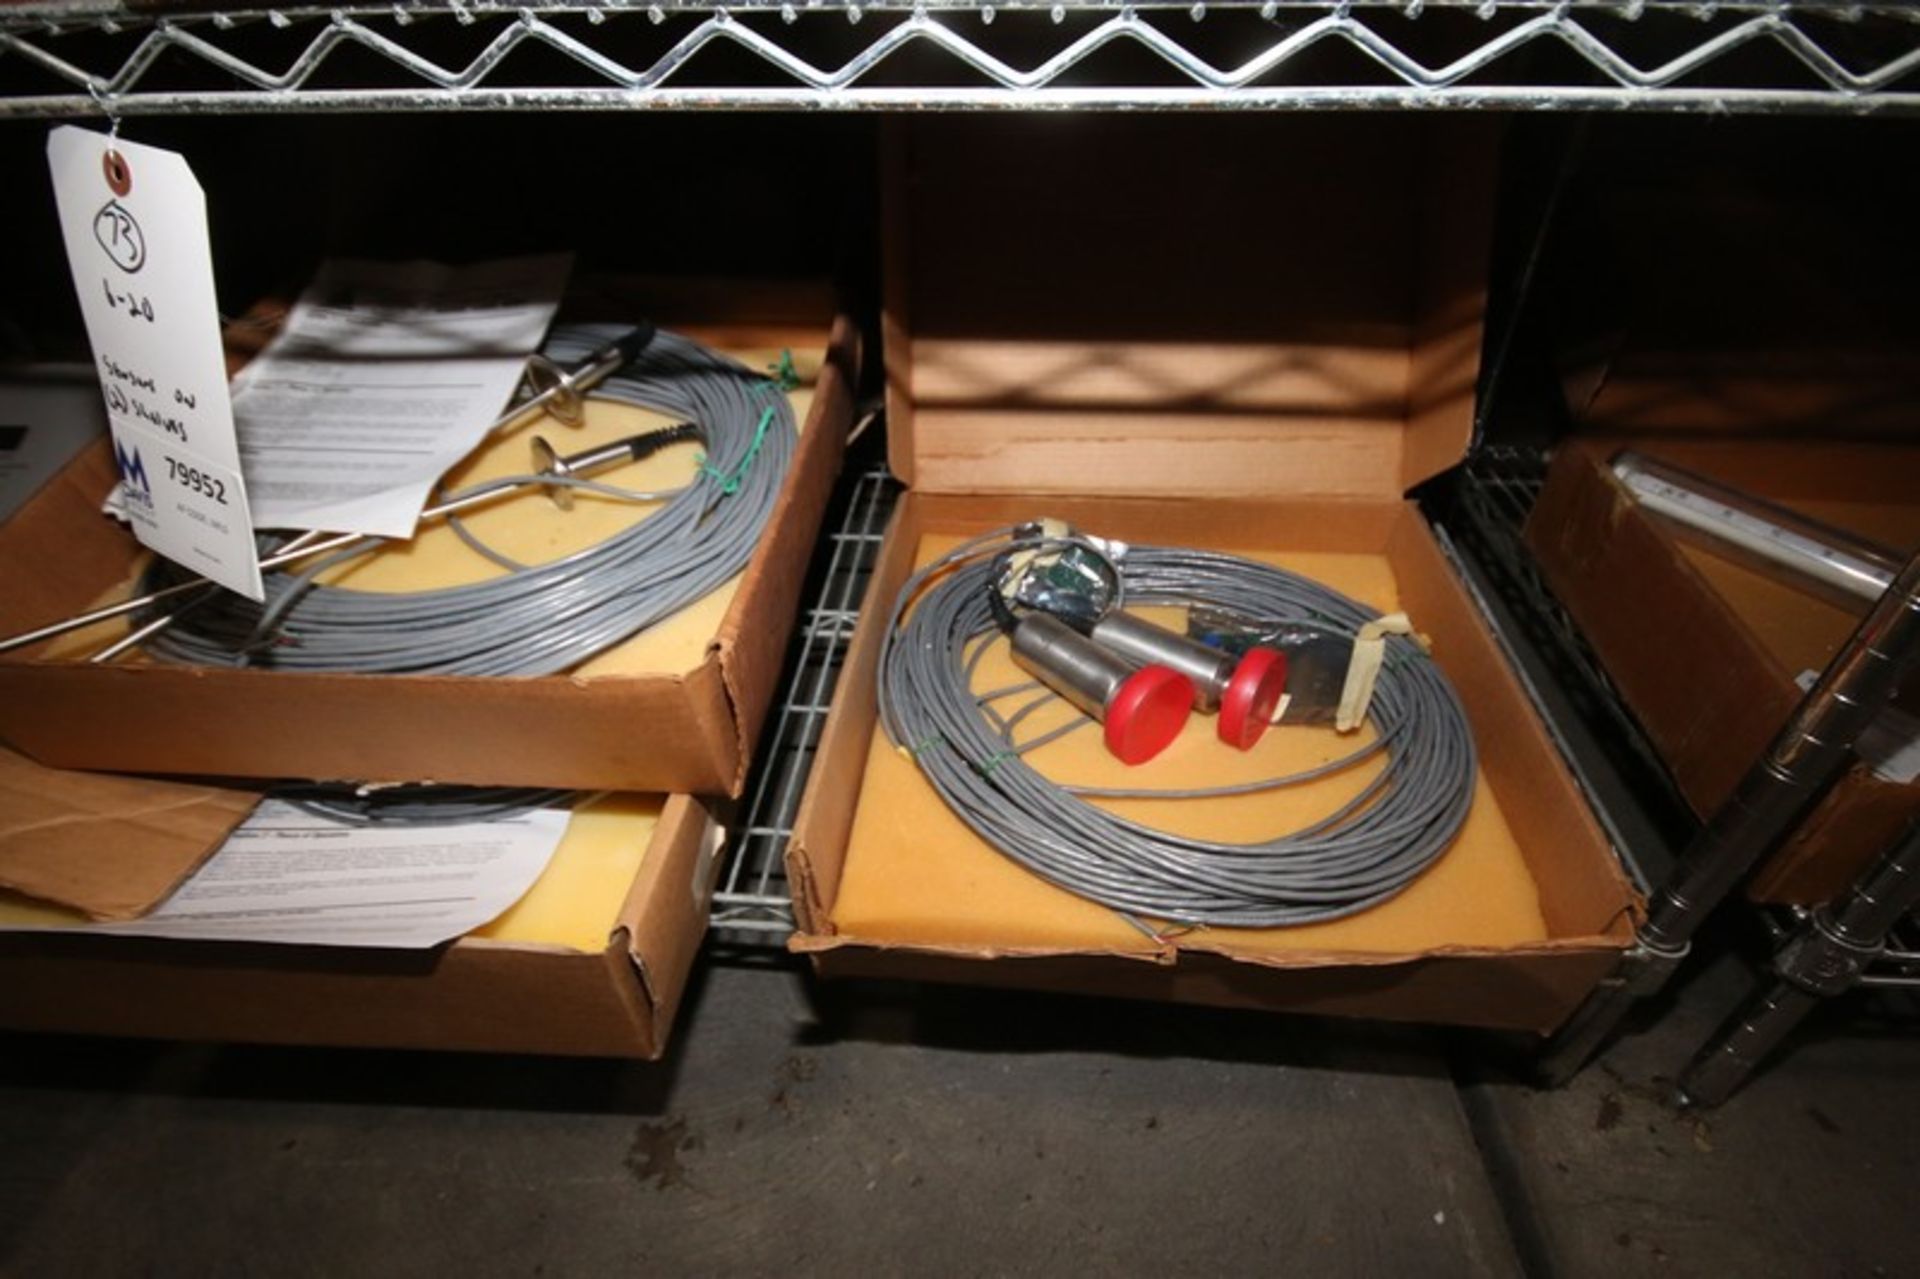 Lot of (11) Assorted Anderson Level Probes, Pressure Transducers & Transmitters, Temp. Probes, - Image 3 of 3